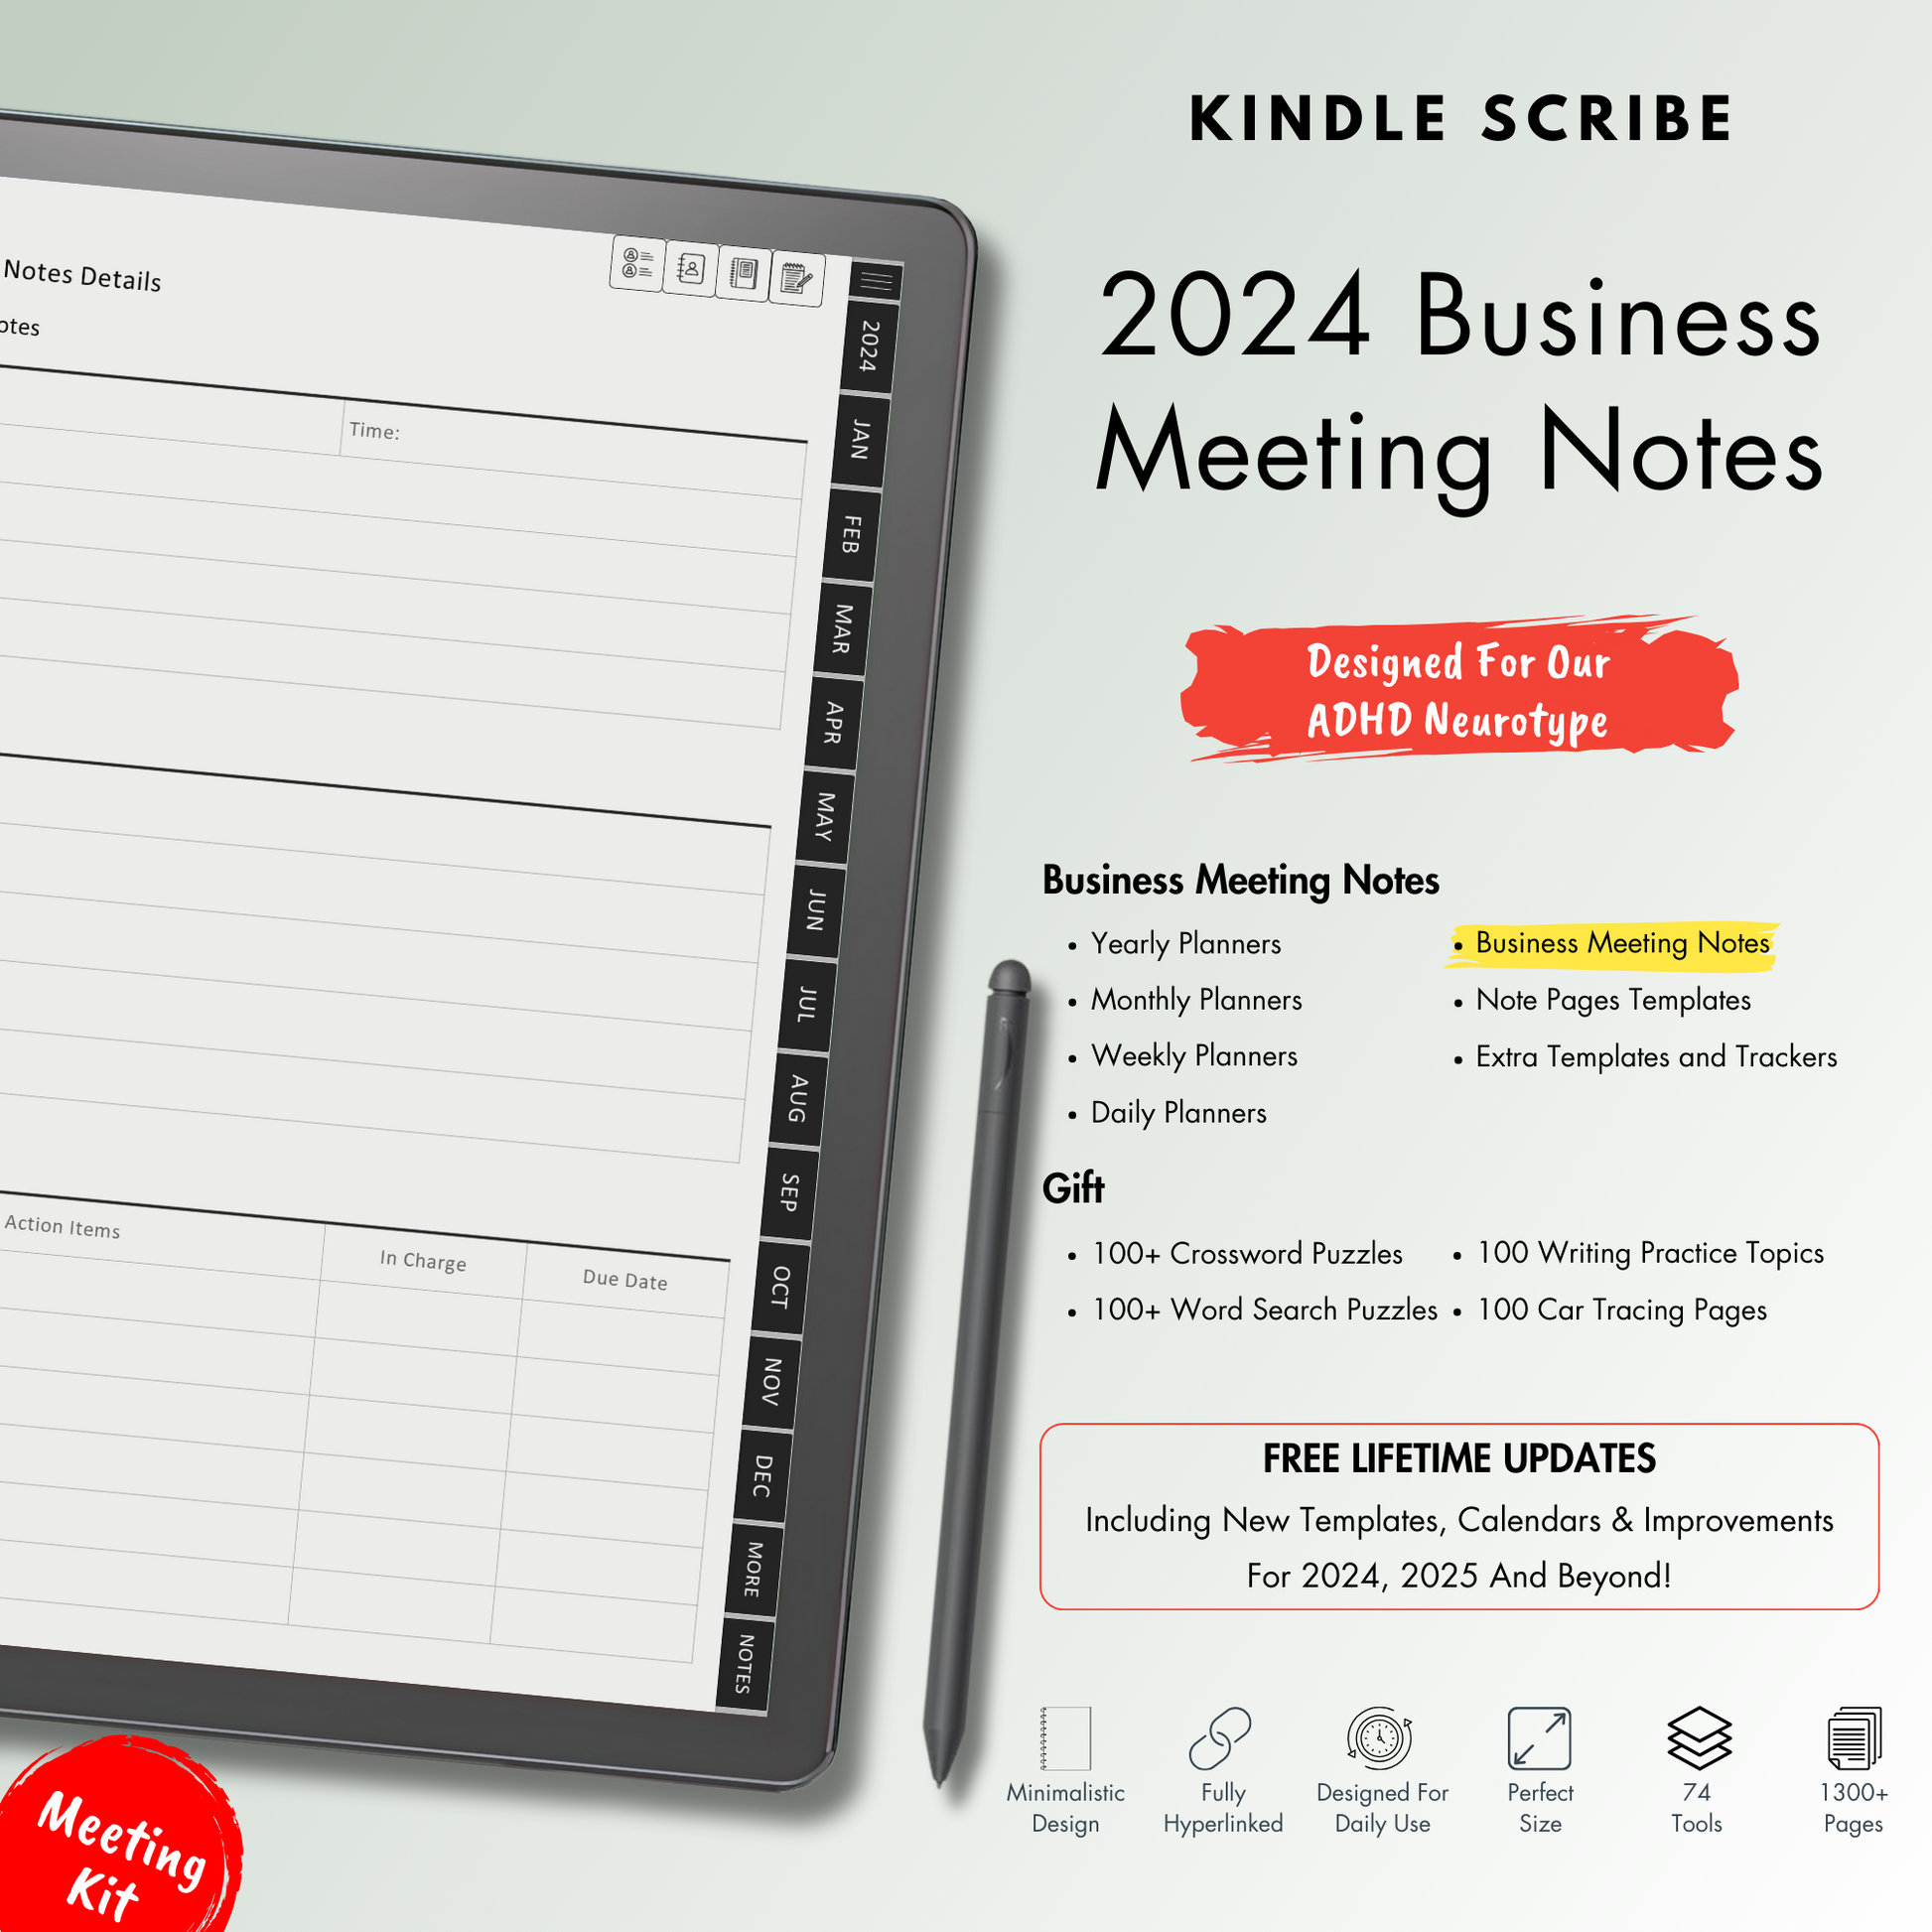 Business Meeting Notes for Kindle Scribe.